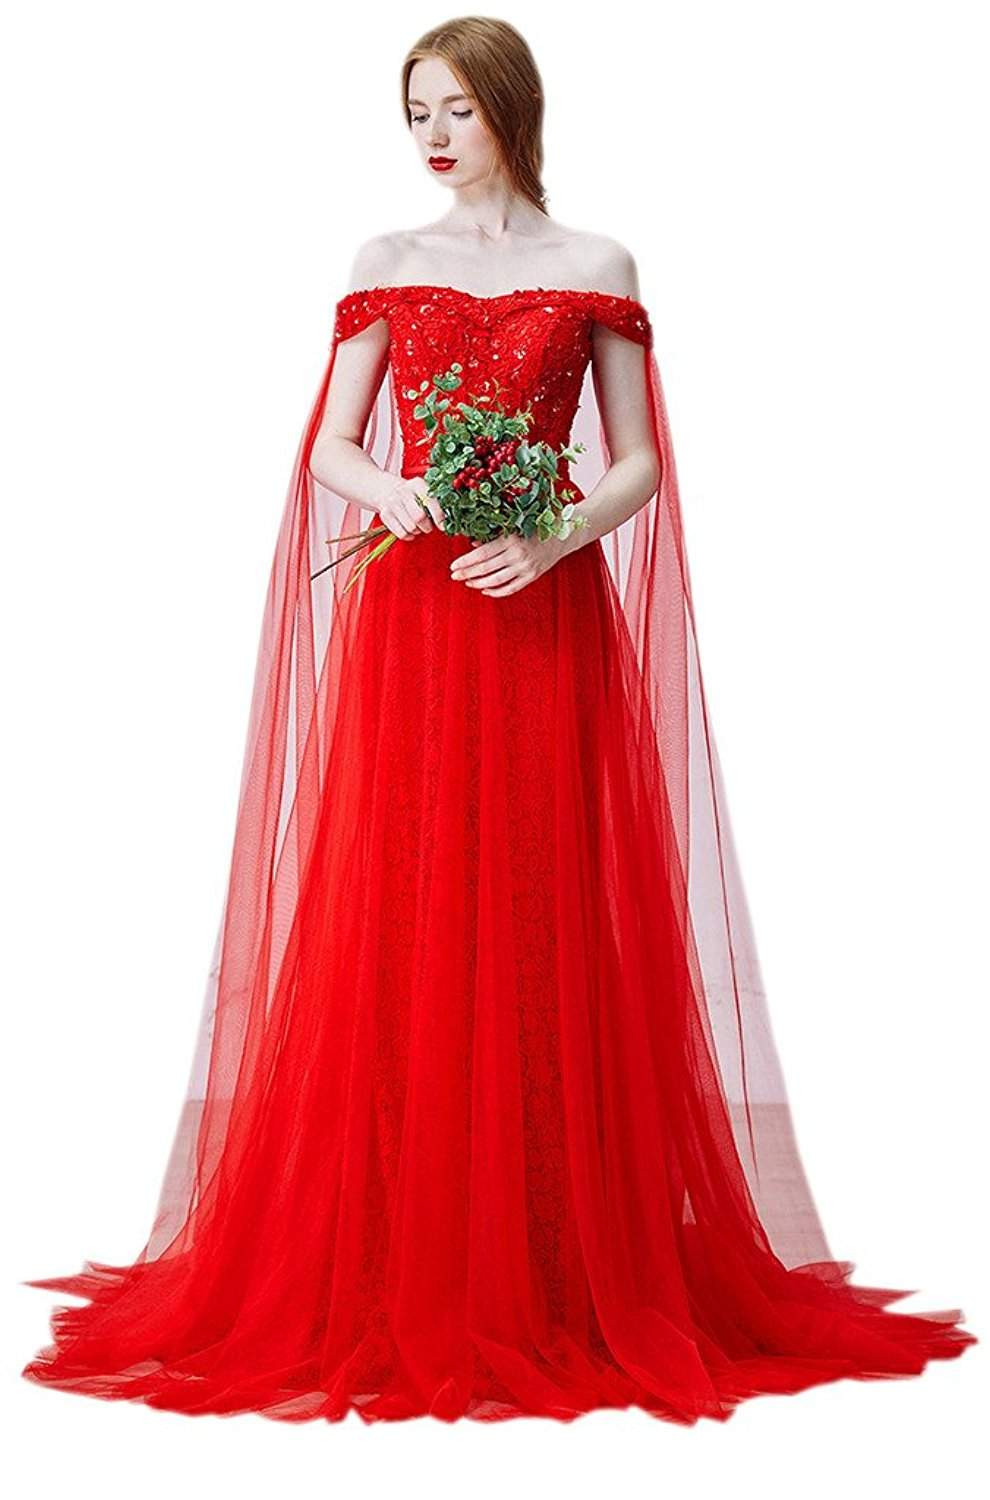 Red Wedding Gowns
 25 Red Wedding Dresses You’ll Absolutely Love 2018